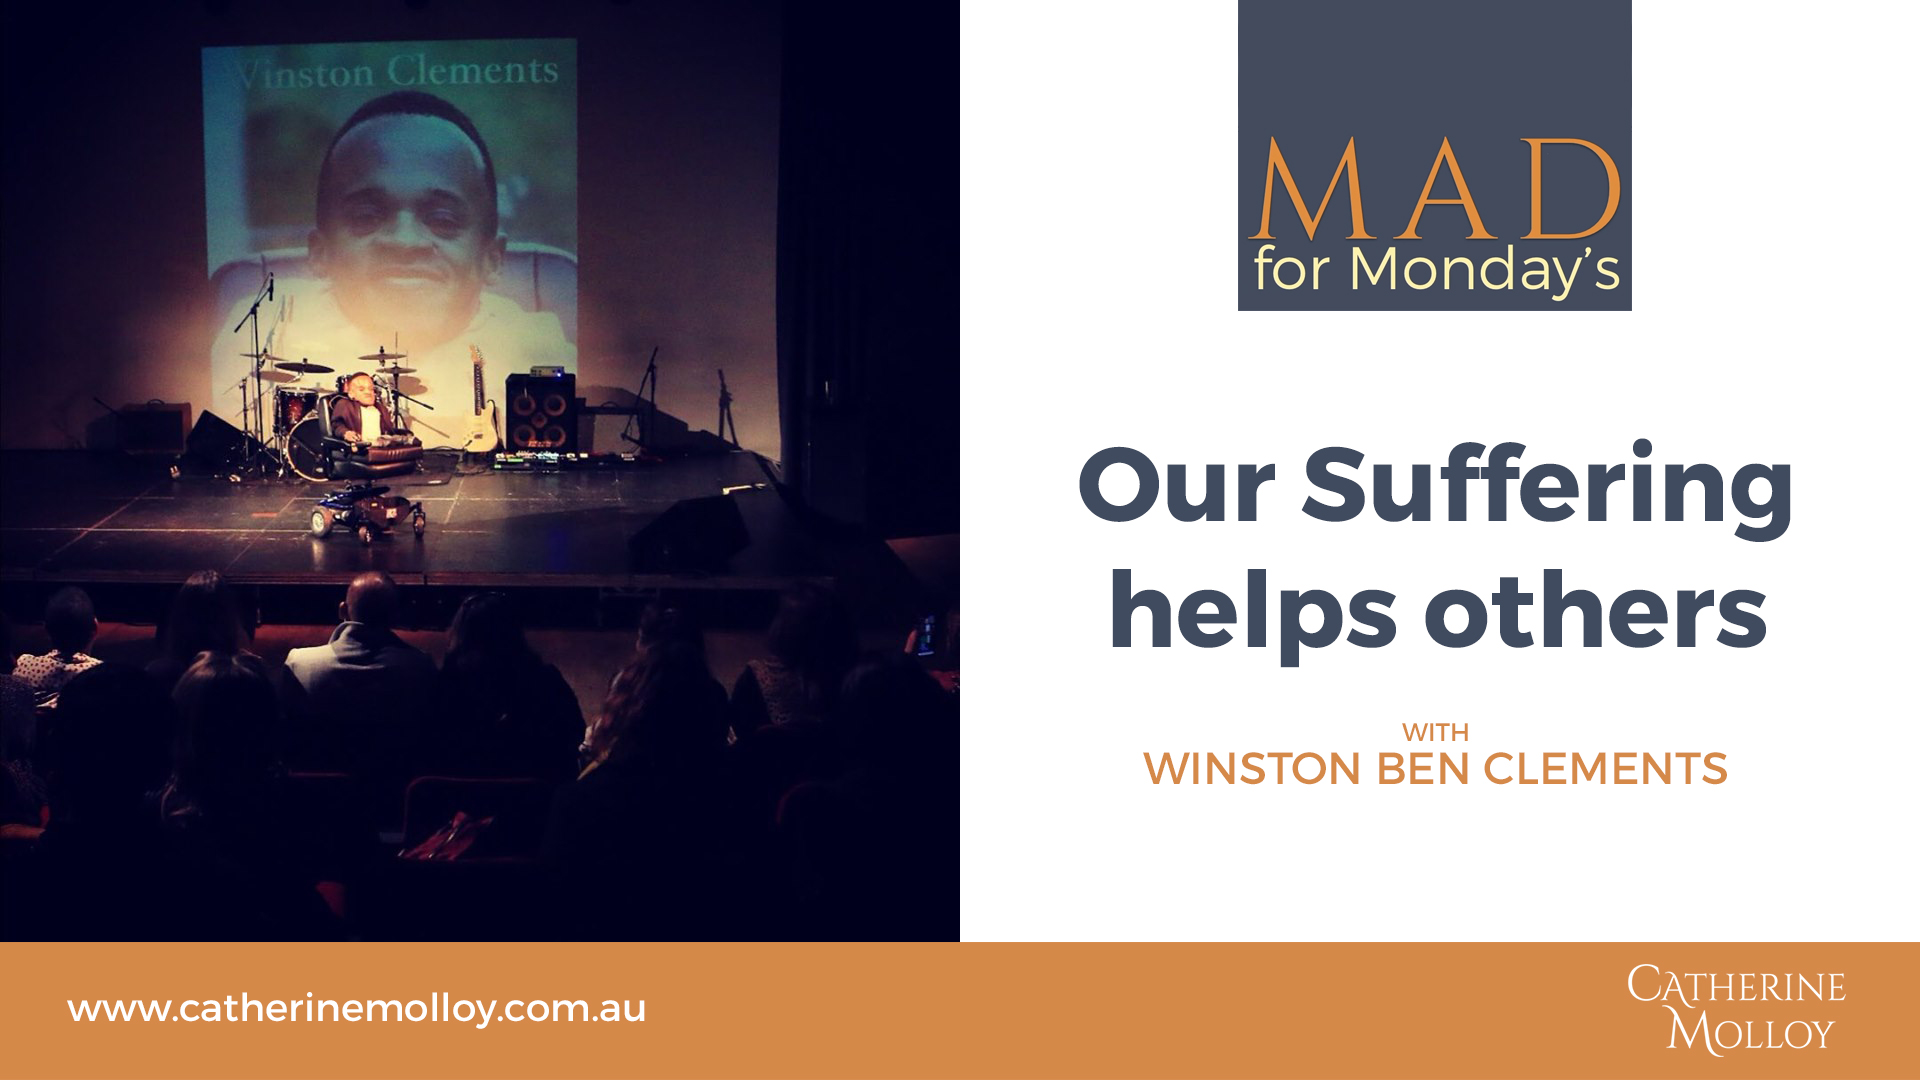 MAD for Monday’s – Our Suffering helps others